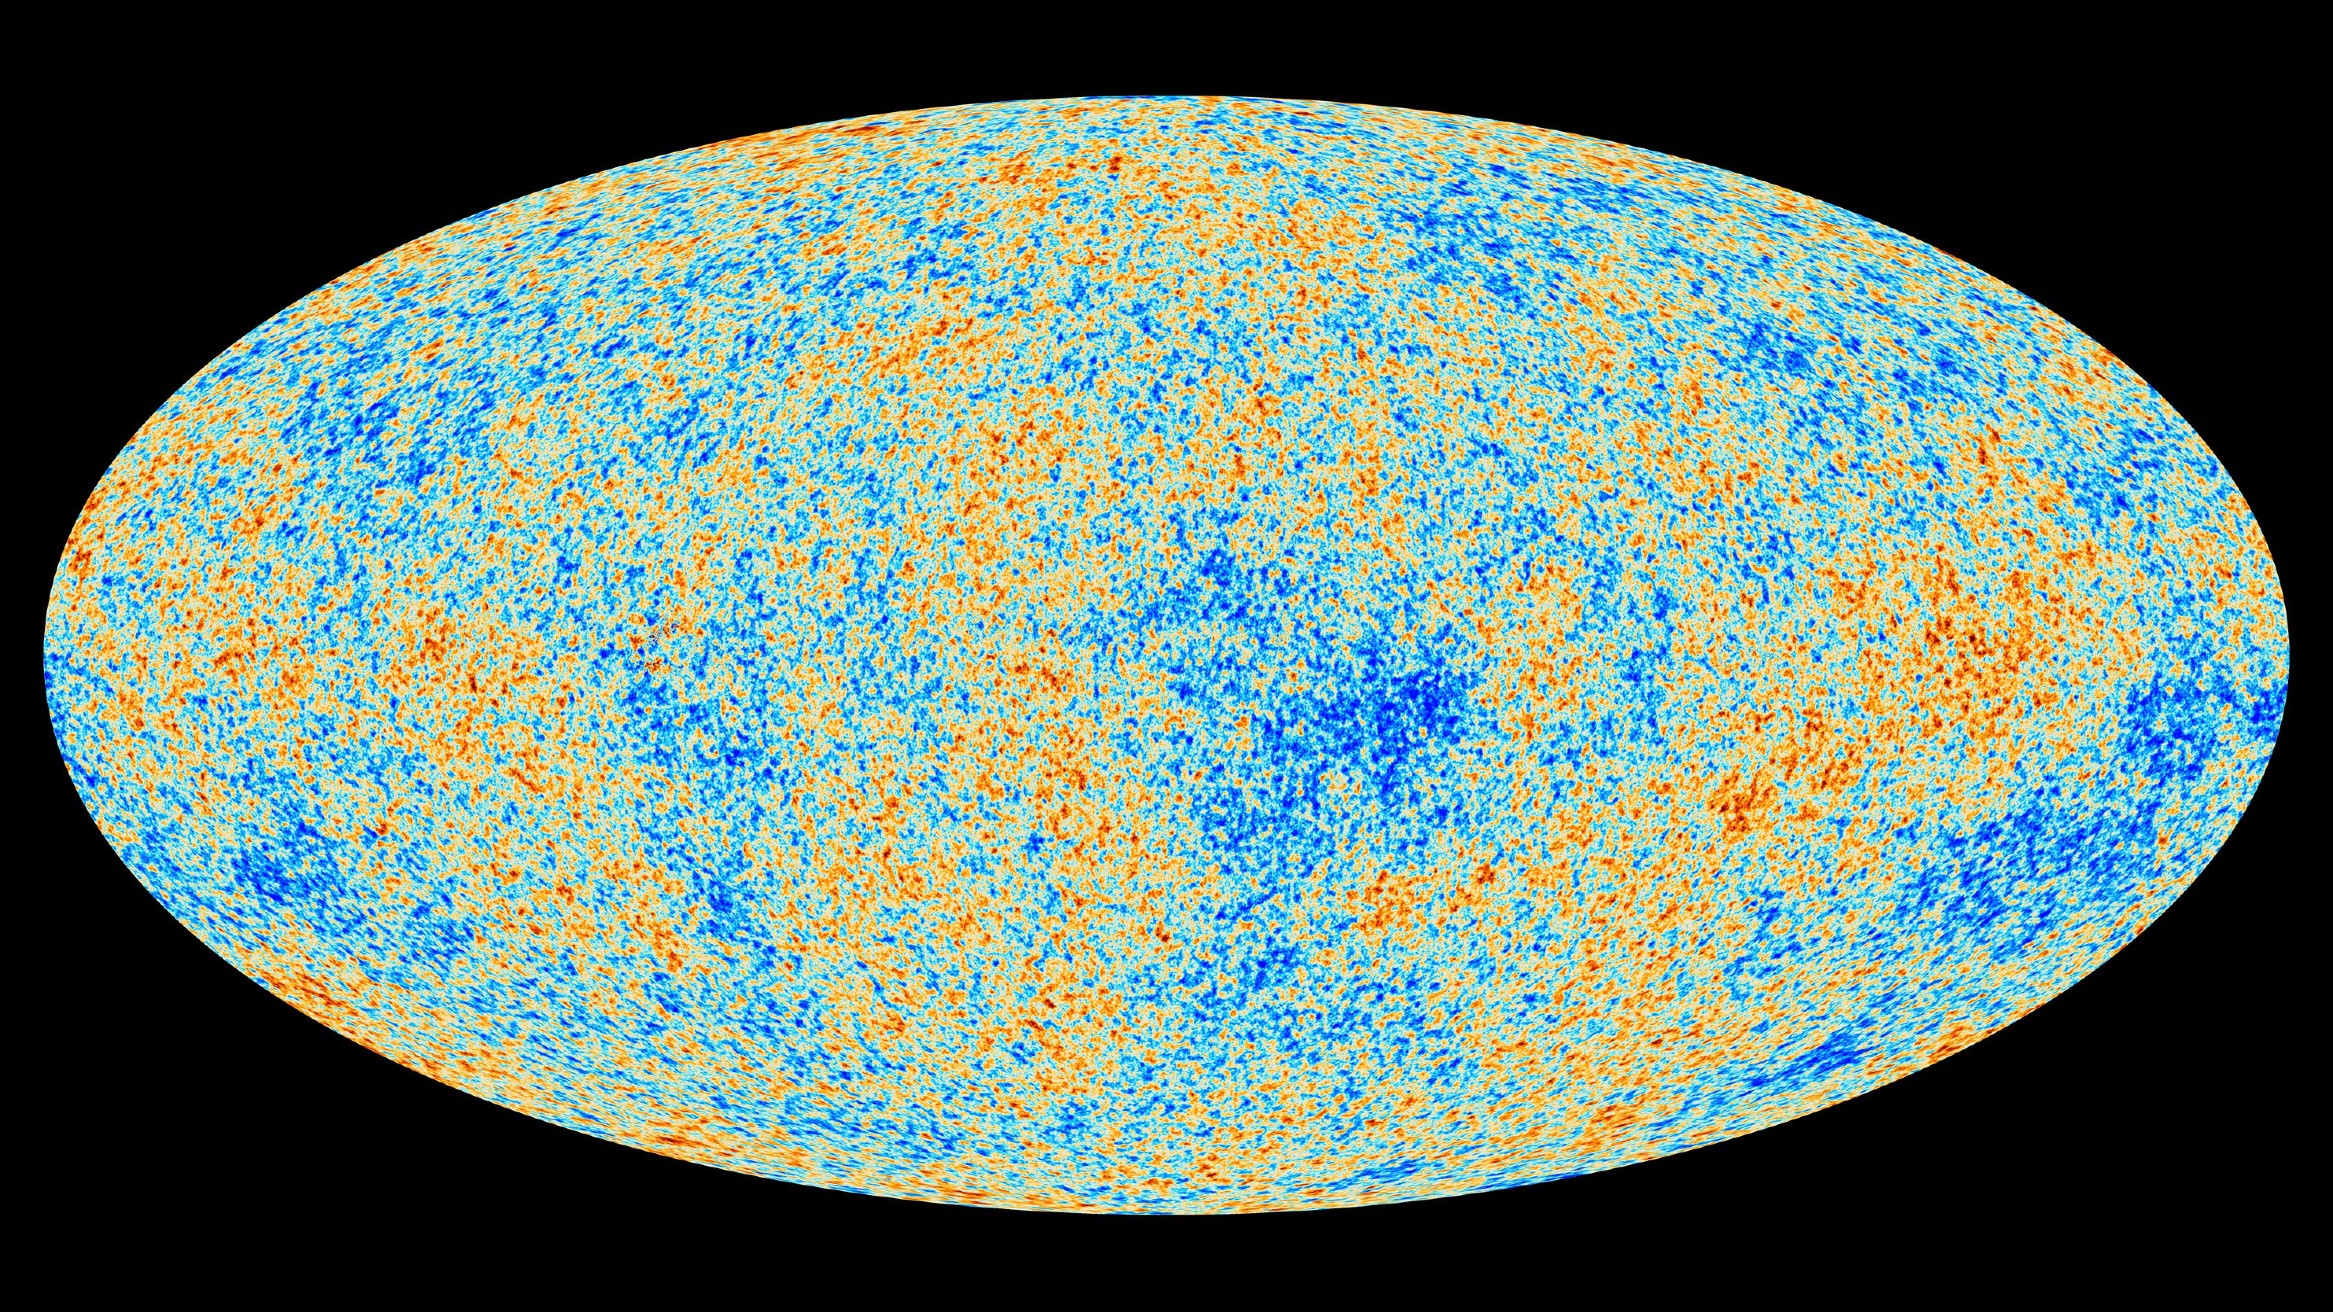 Cosmic microwave background radiation seen from Planck satellites